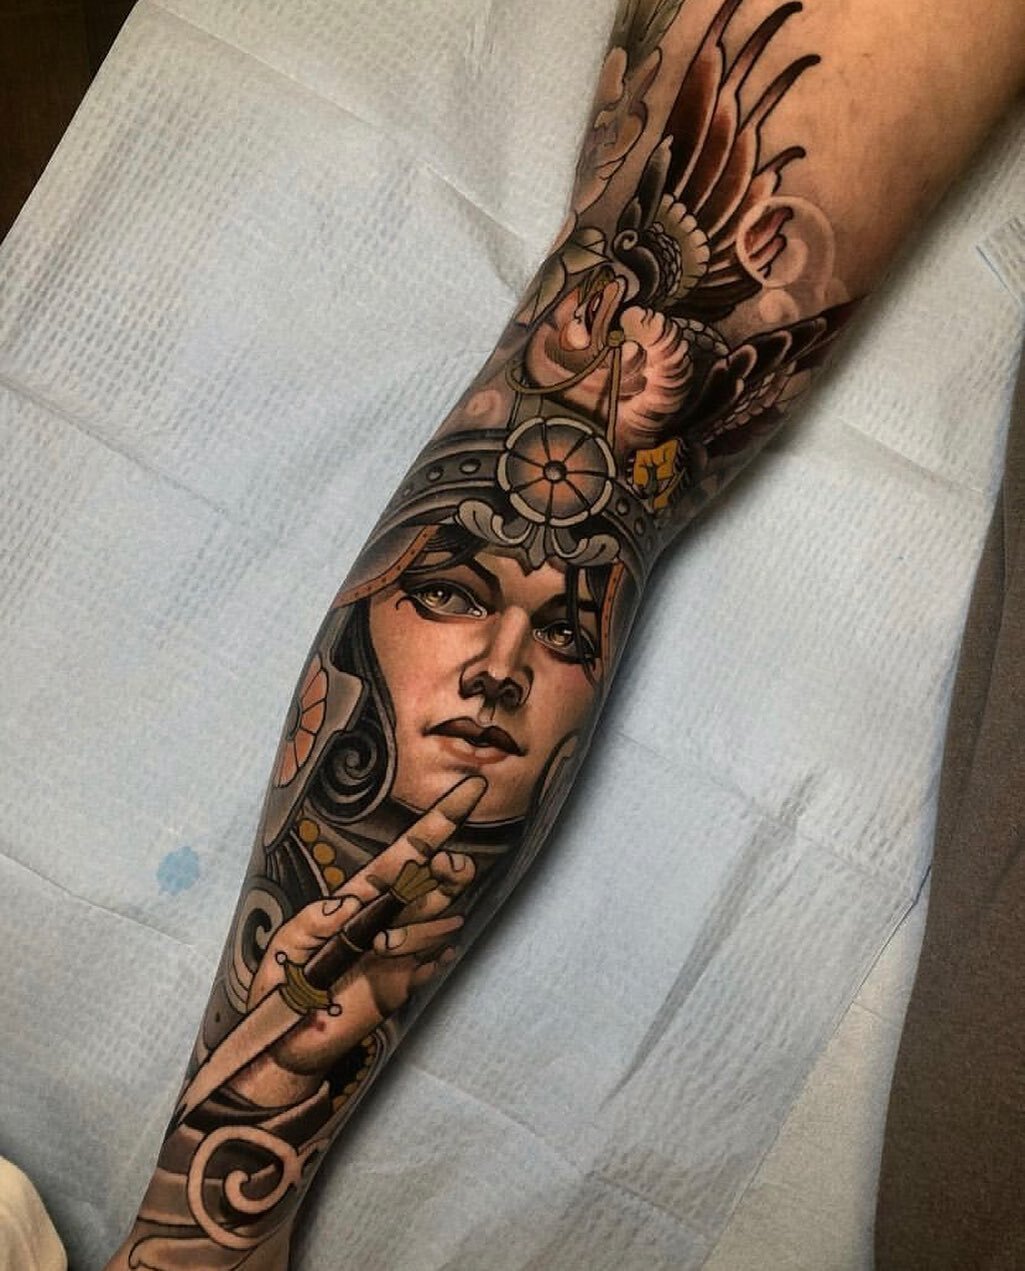 By @samytattoo 
.
.
.
.
Dm him directly for appointments